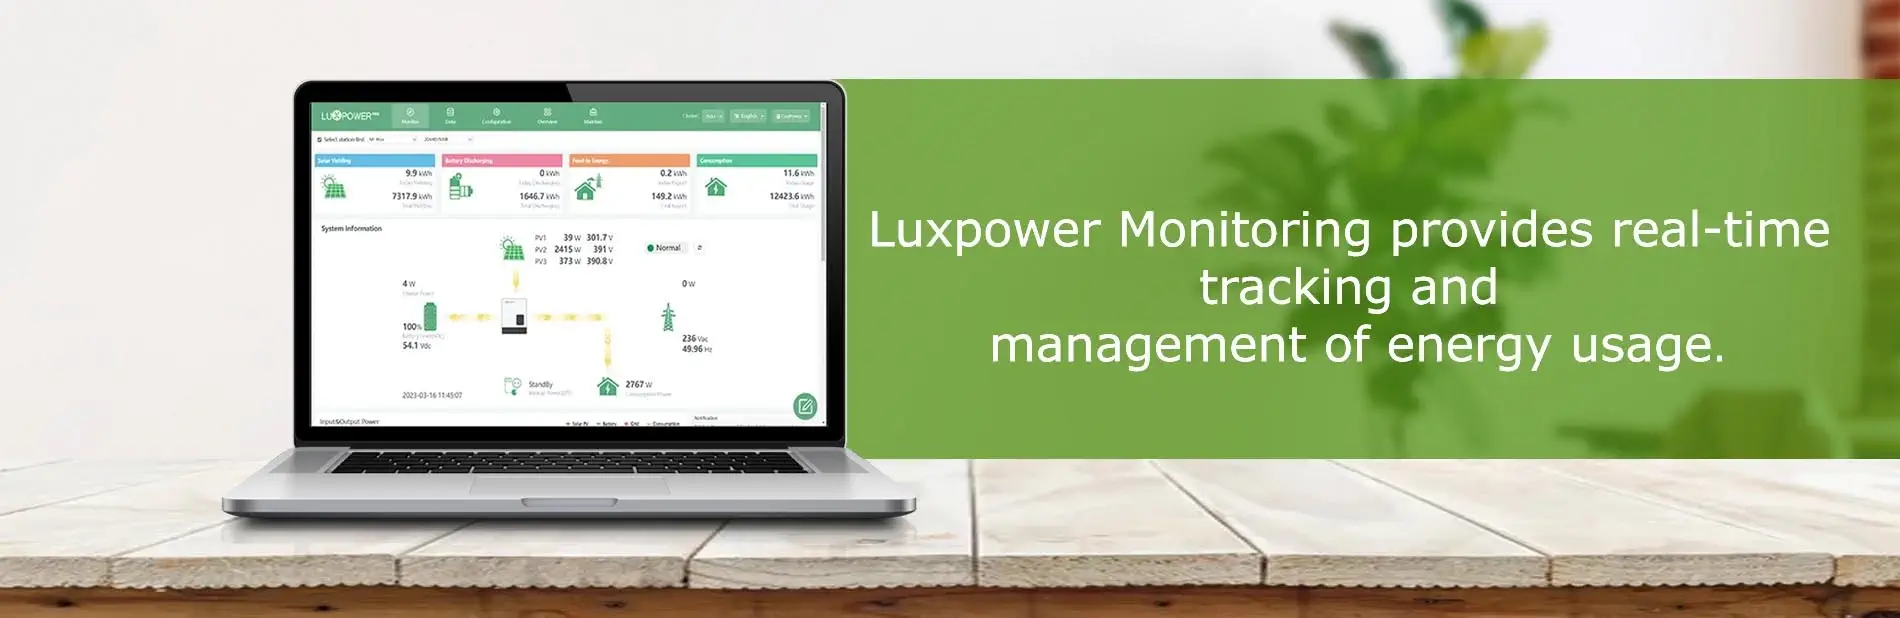 luxpower monitoring